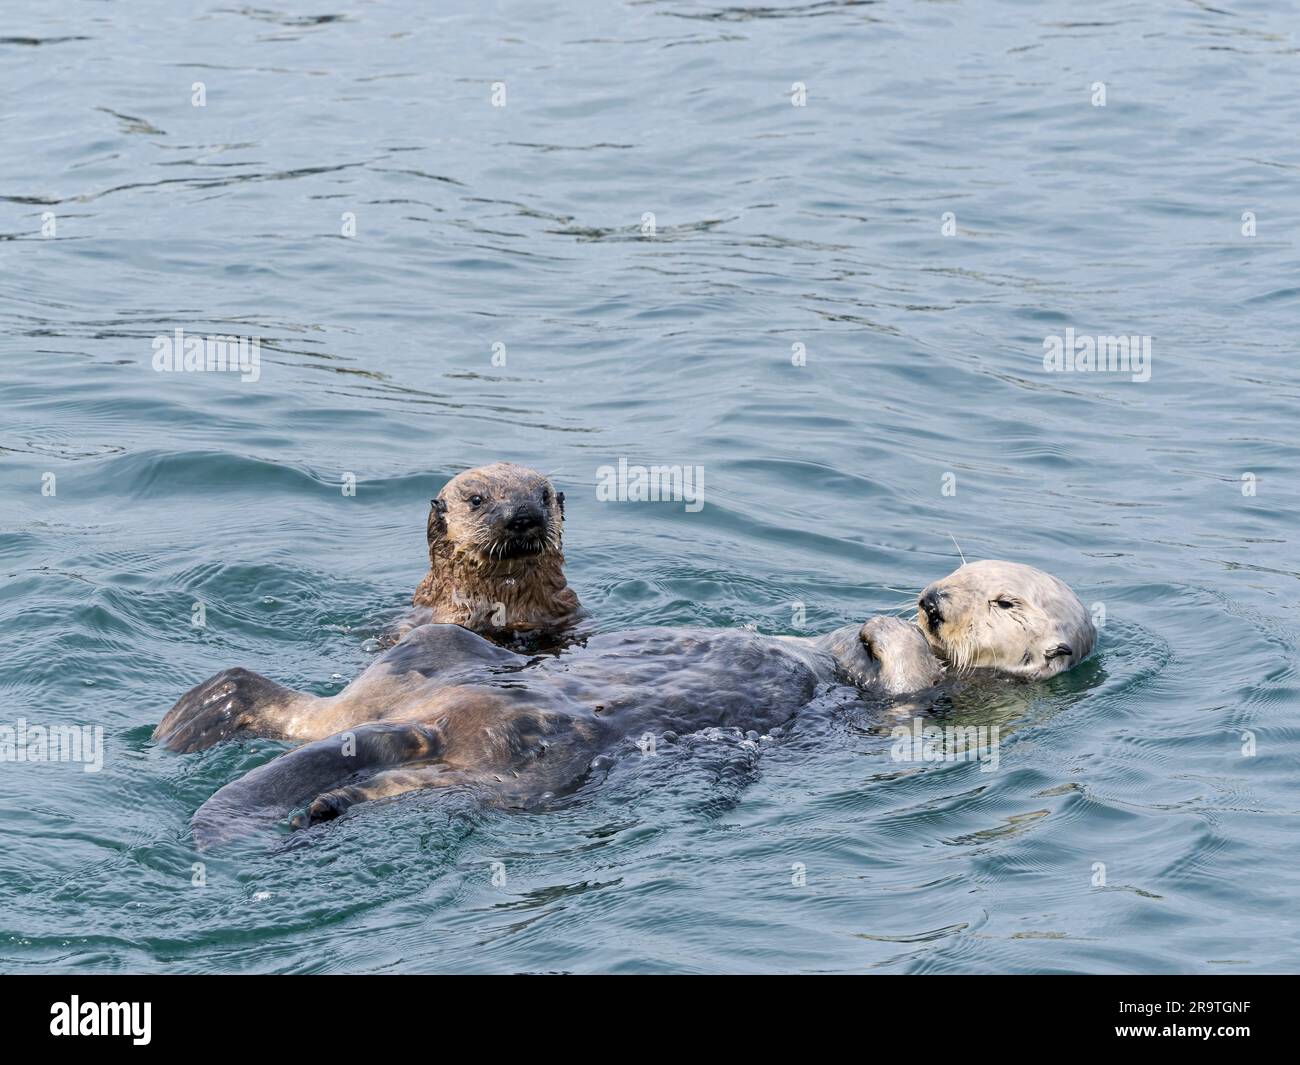 Mother and pup sea otter, Enhydra lutris, together in Monterey Bay National Marine Sanctuary, California, USA. Stock Photo